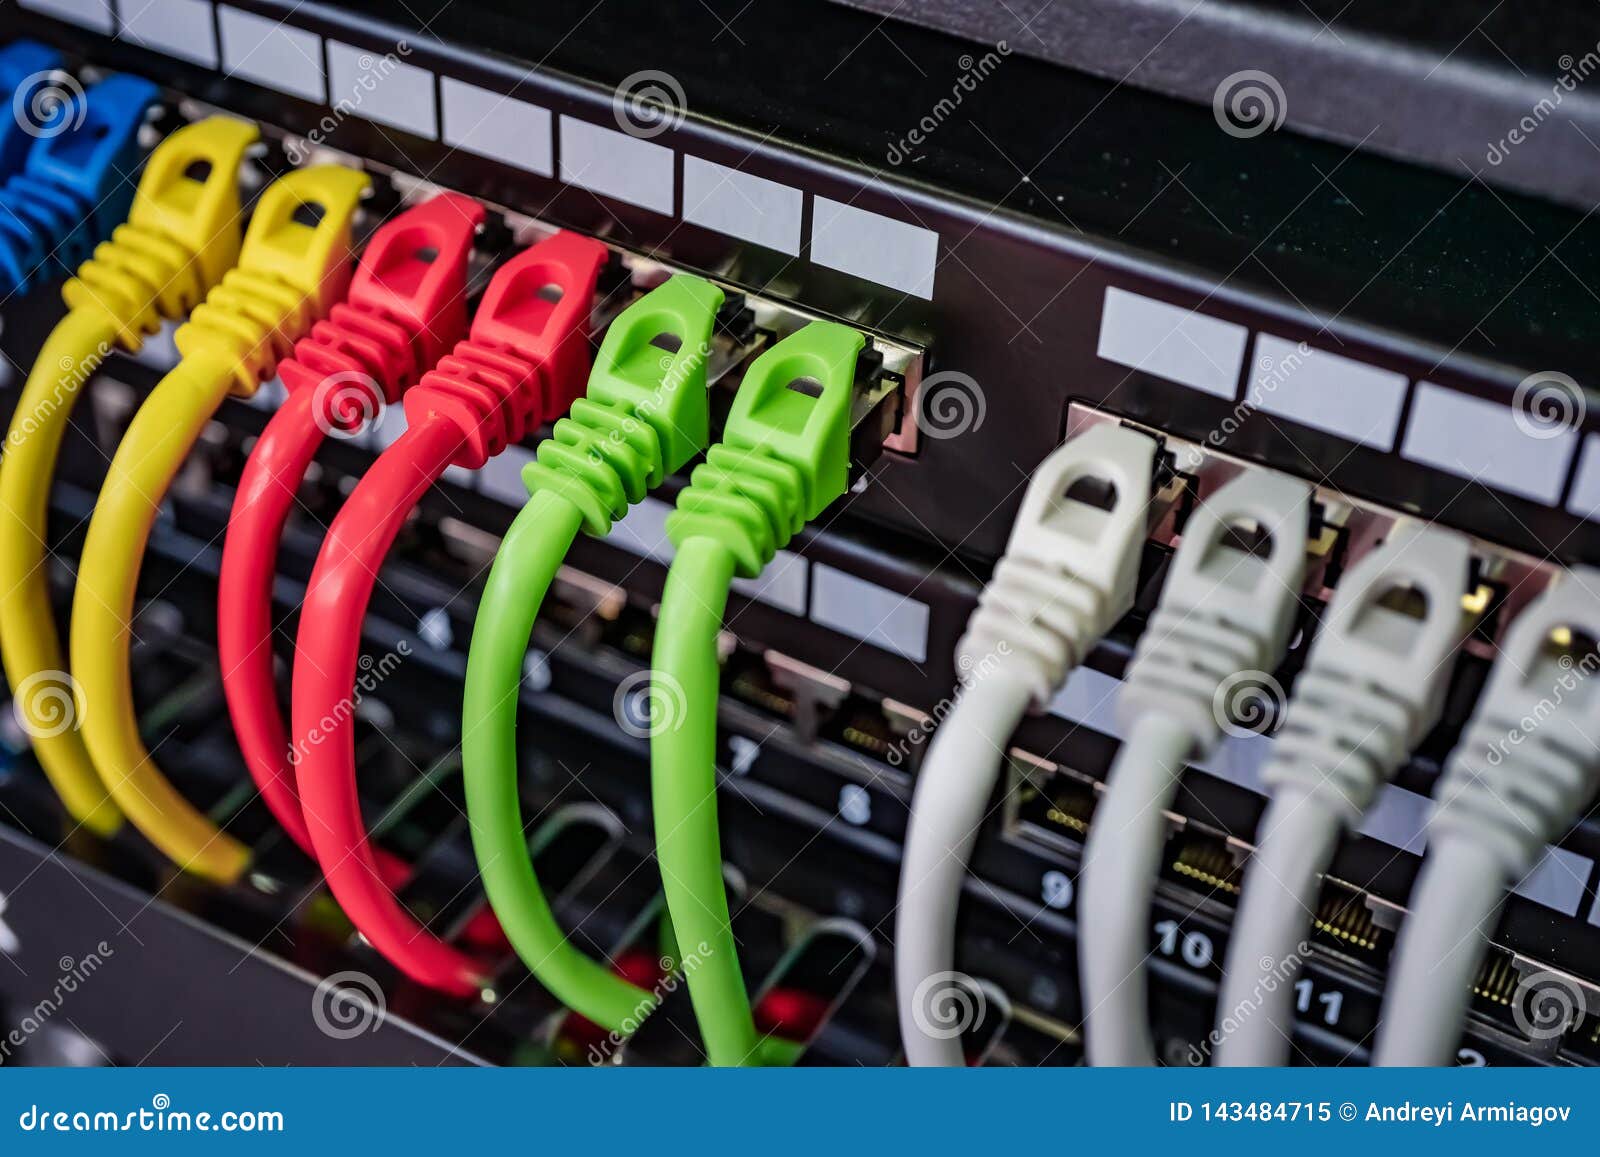 colorful telecommunication colorful ethernet cables connected to the switch in internet data center